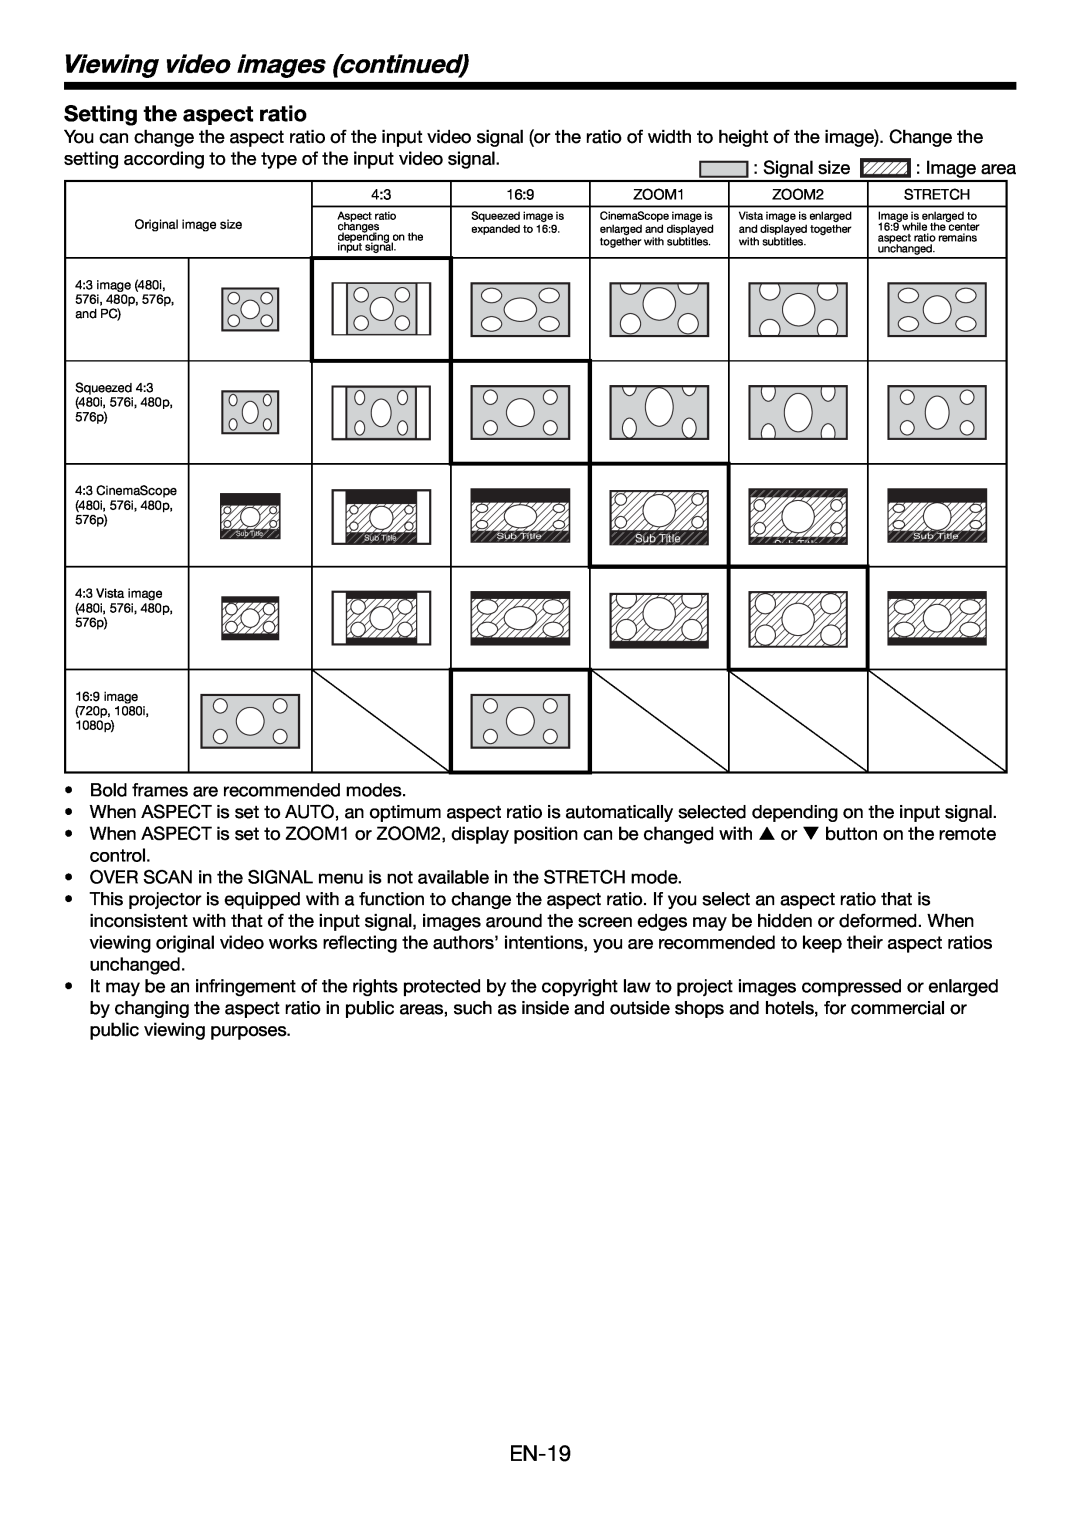 Mitsubishi Electronics HC4900 user manual Setting the aspect ratio, Viewing video images continued, EN-19 